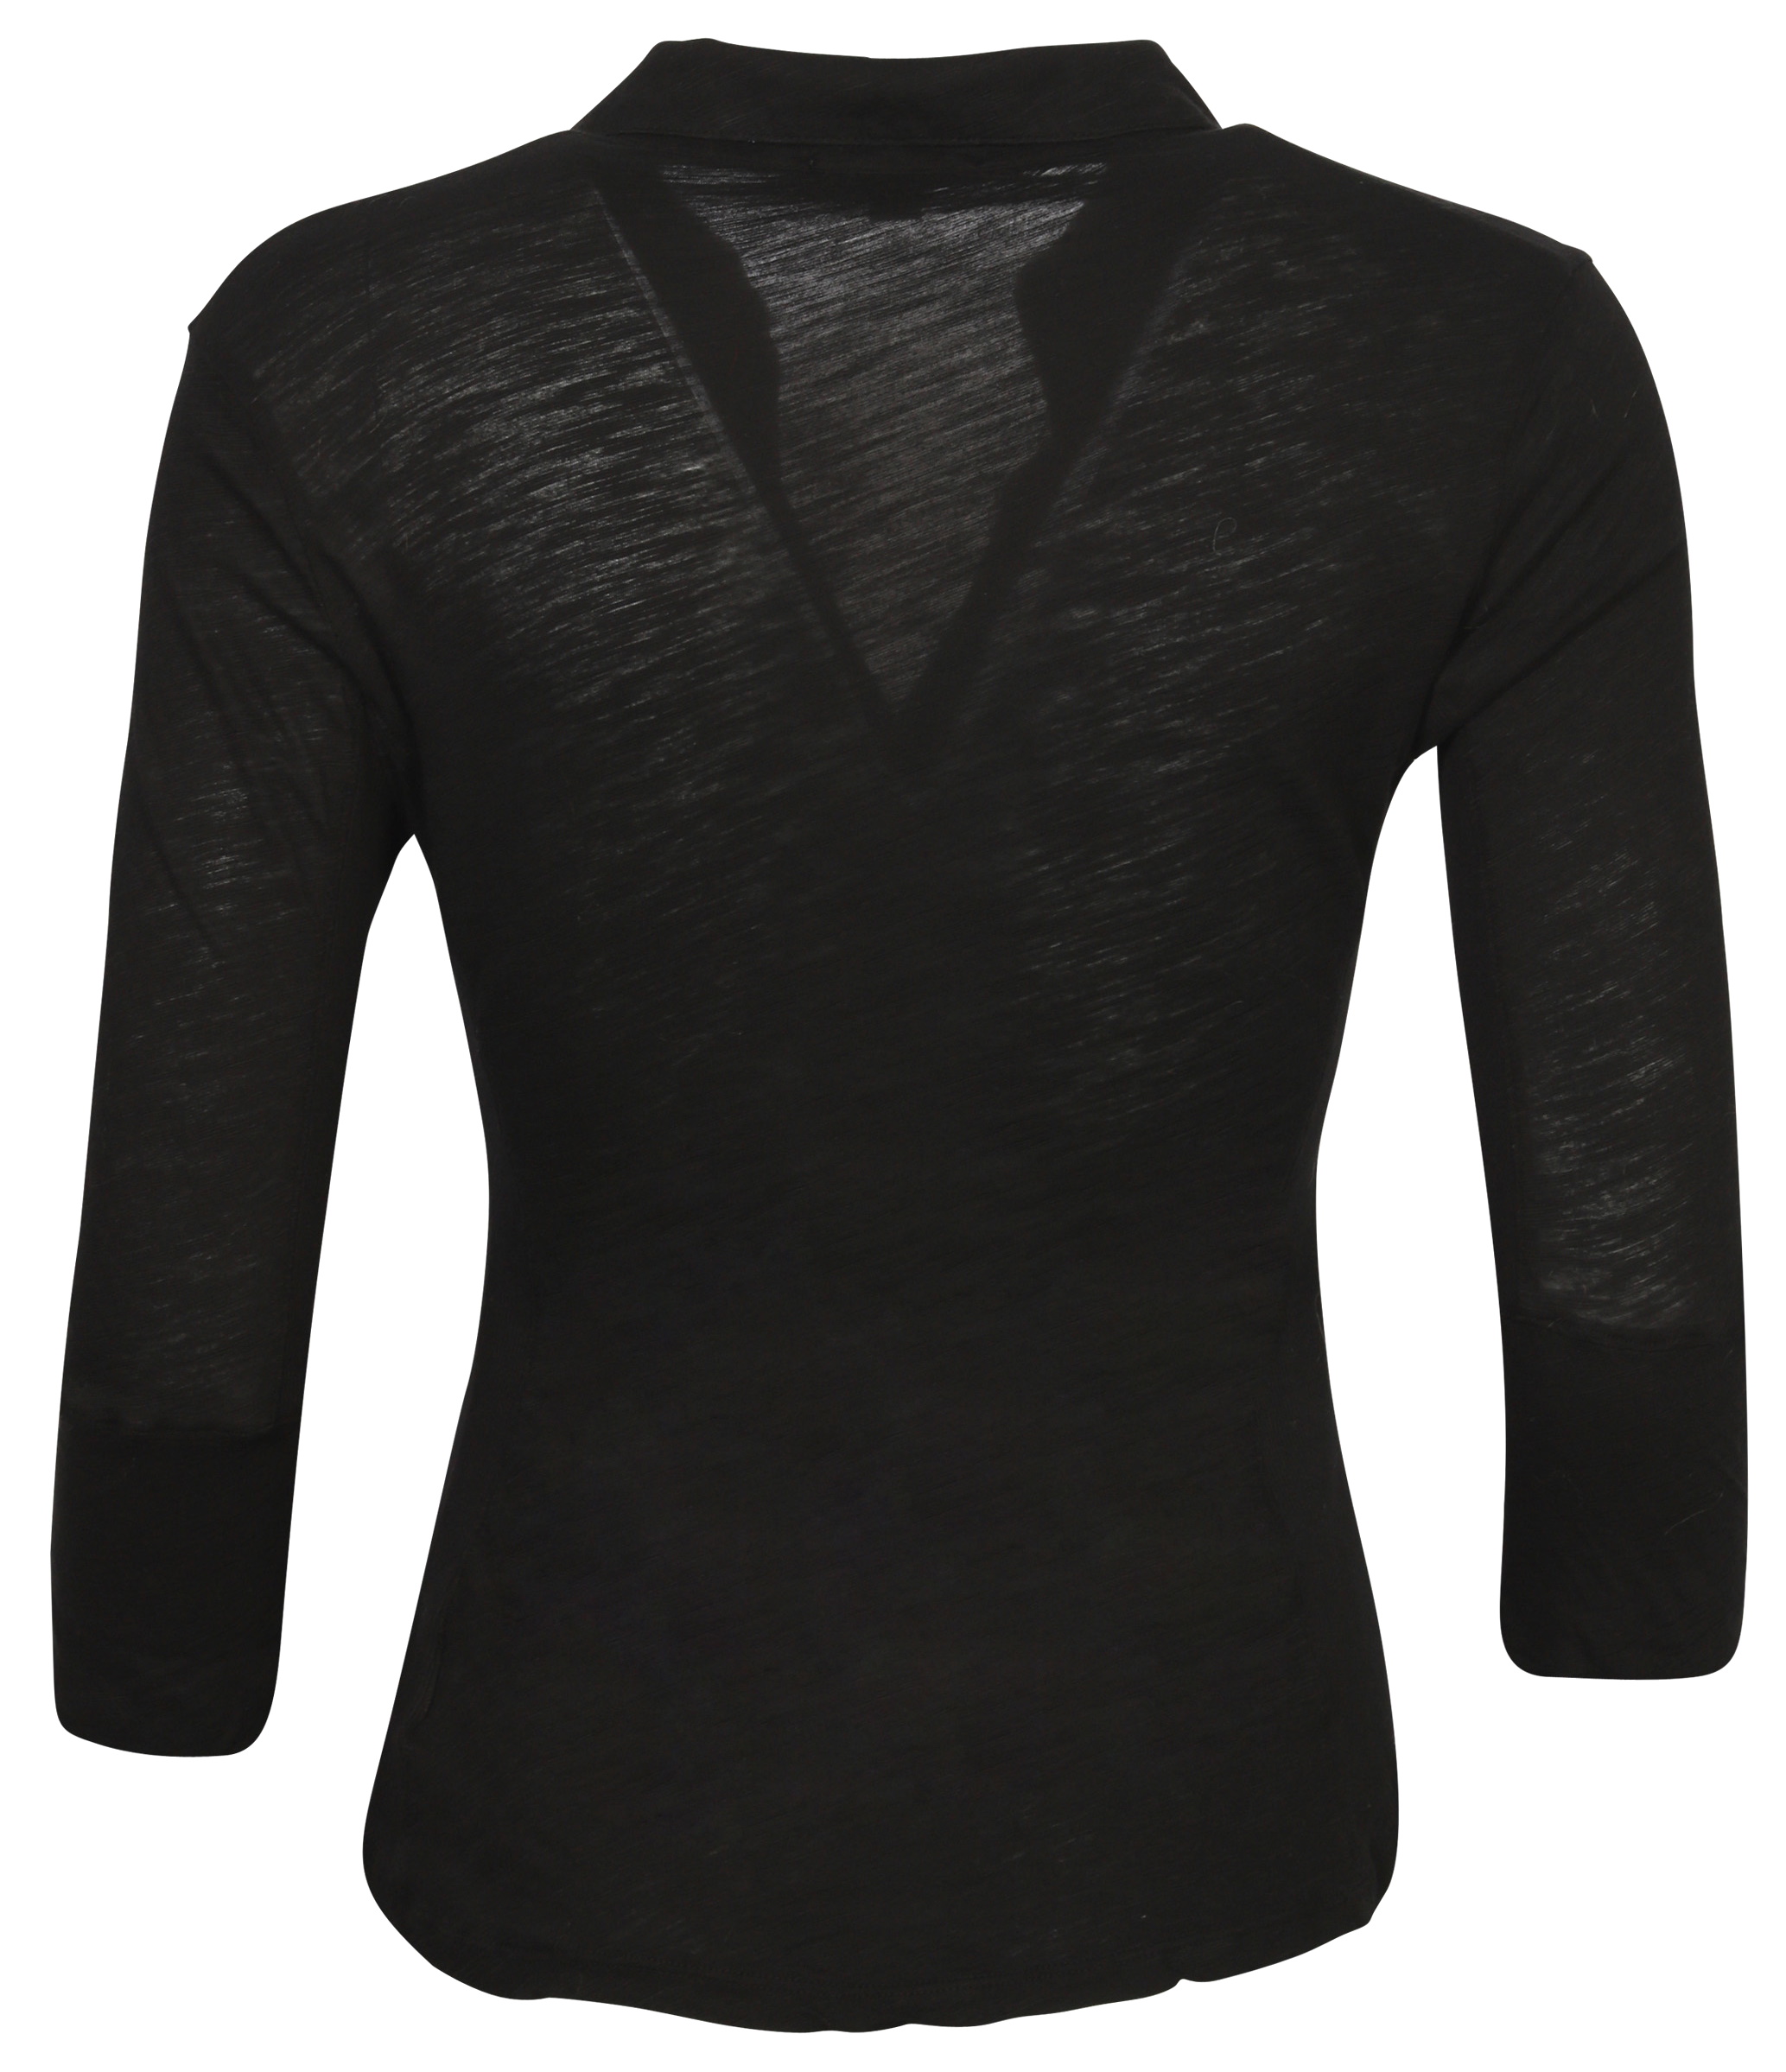 JAMES PERSE Contrast Panel Shirt in Black 2/M